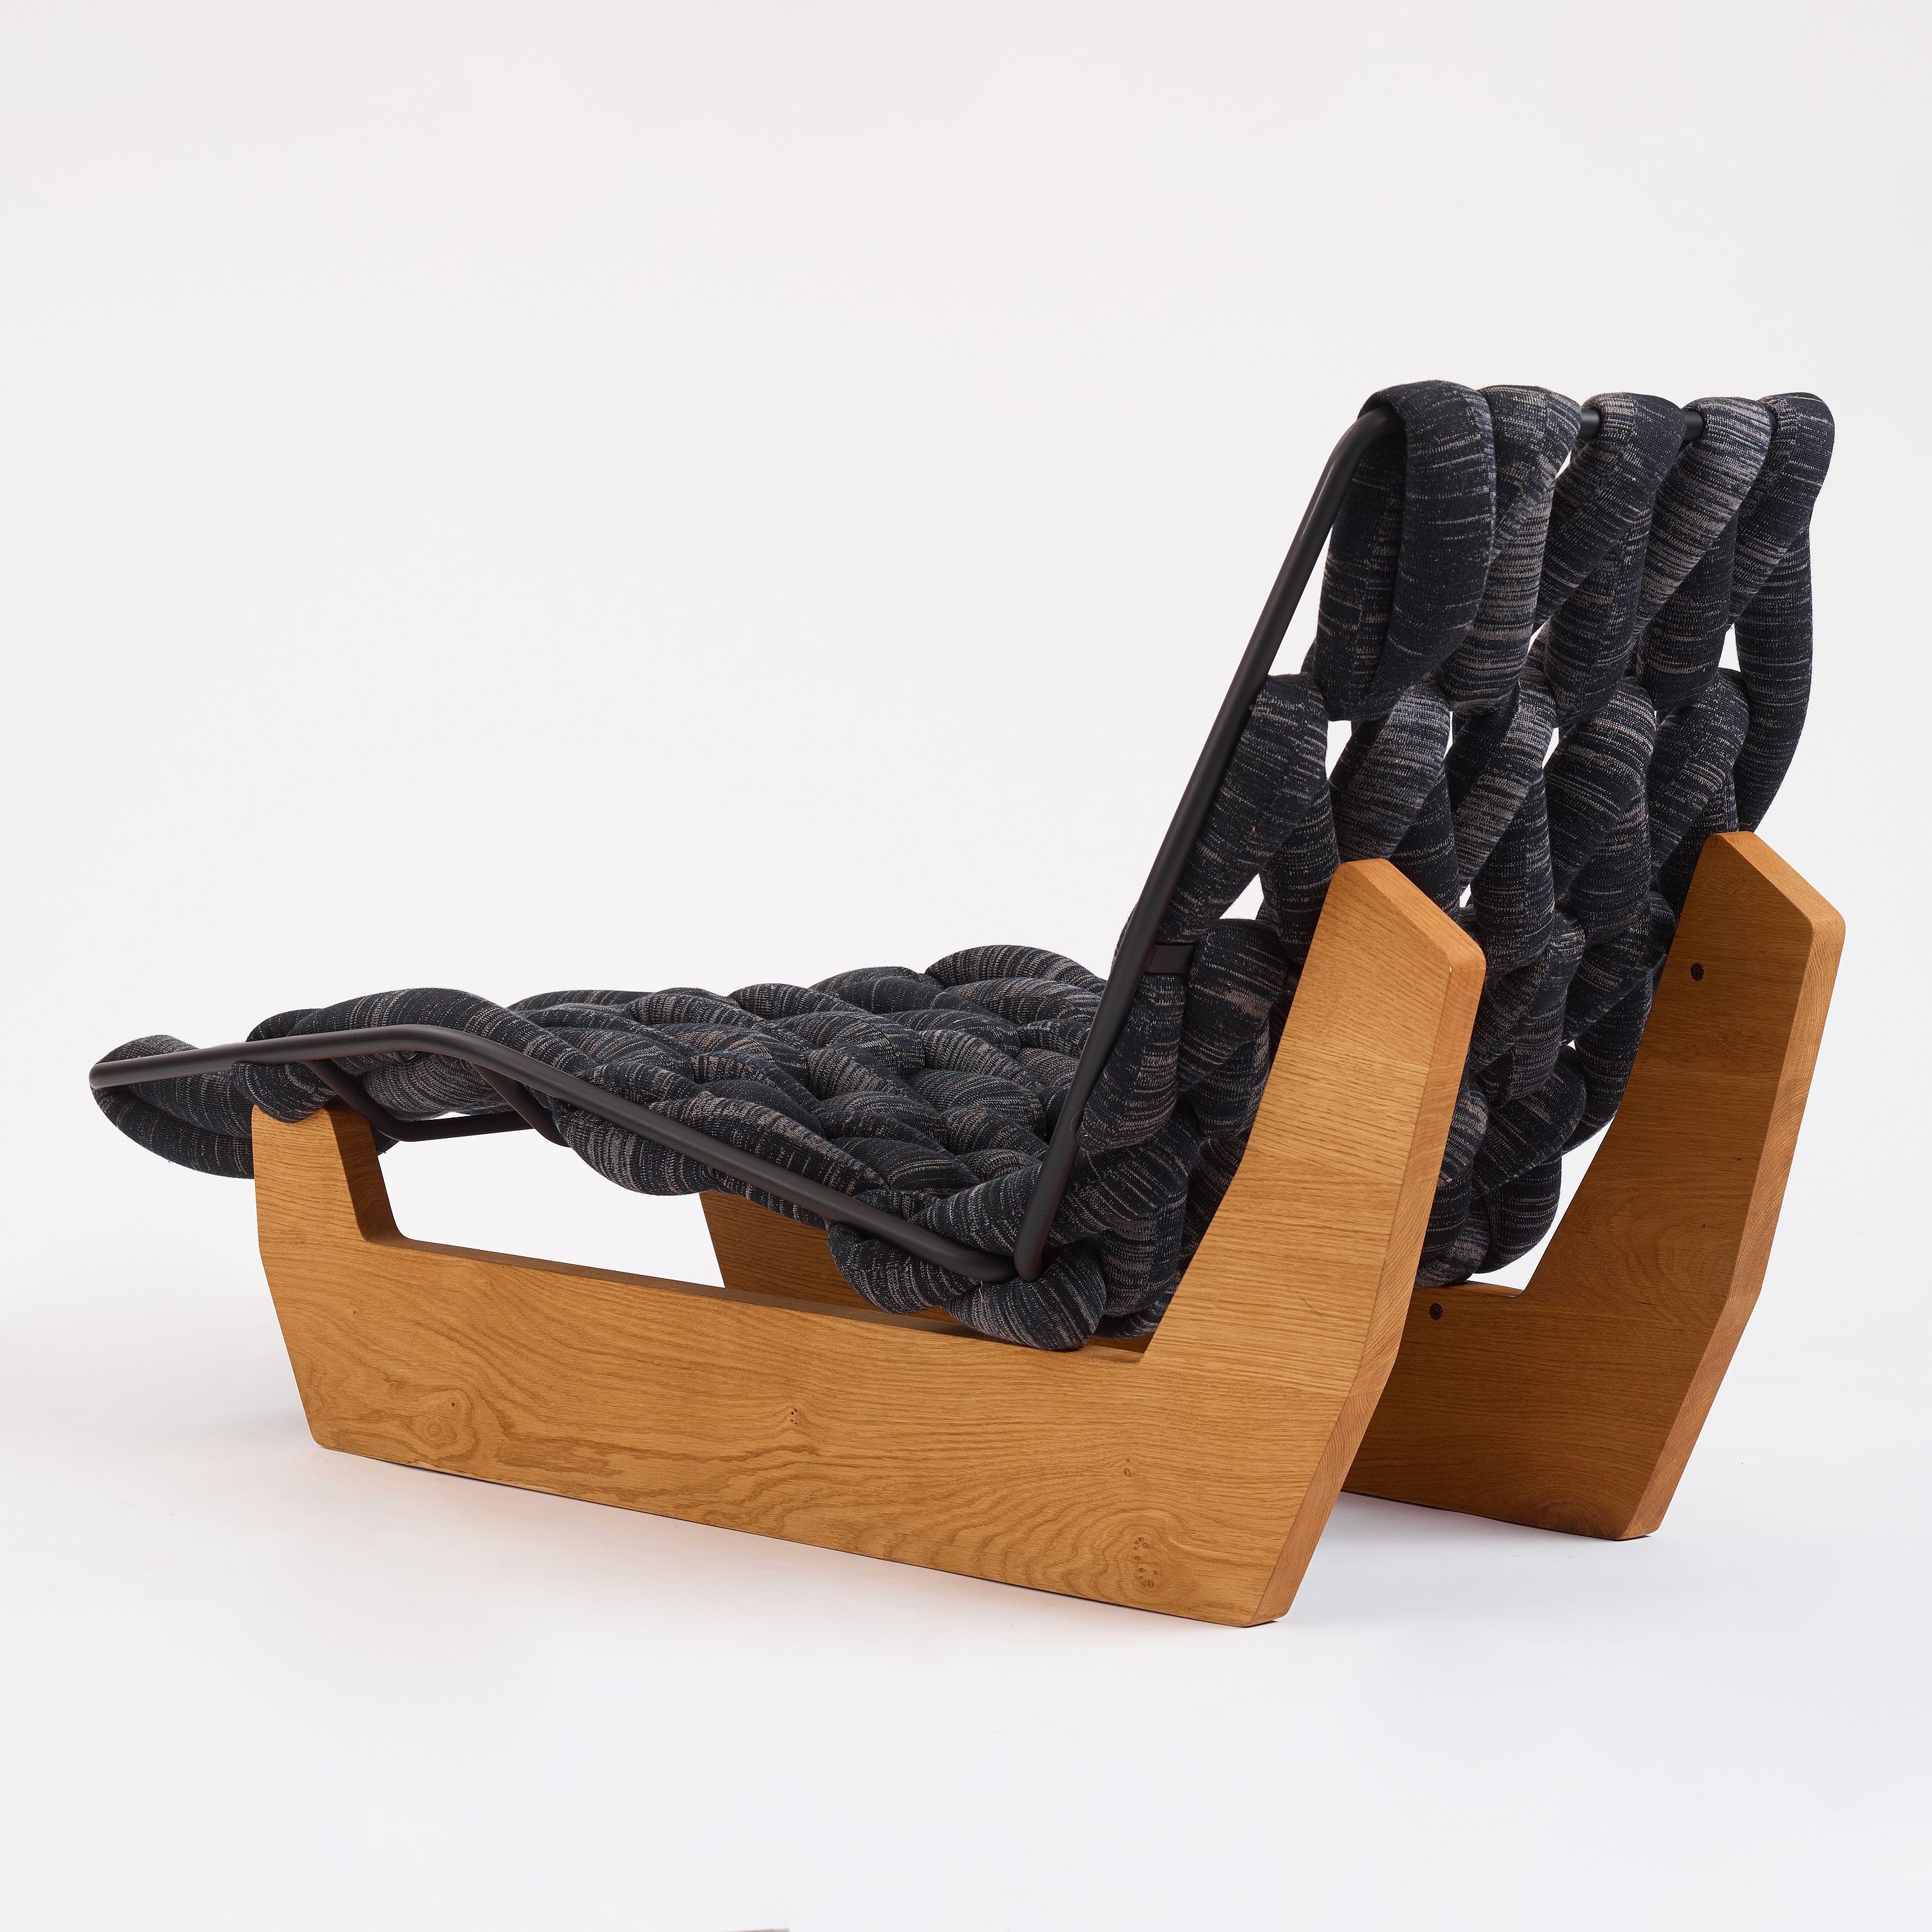 Artwork by Patricia Urquiola, 'Biknit', chaise longue, Made of black and grey textile